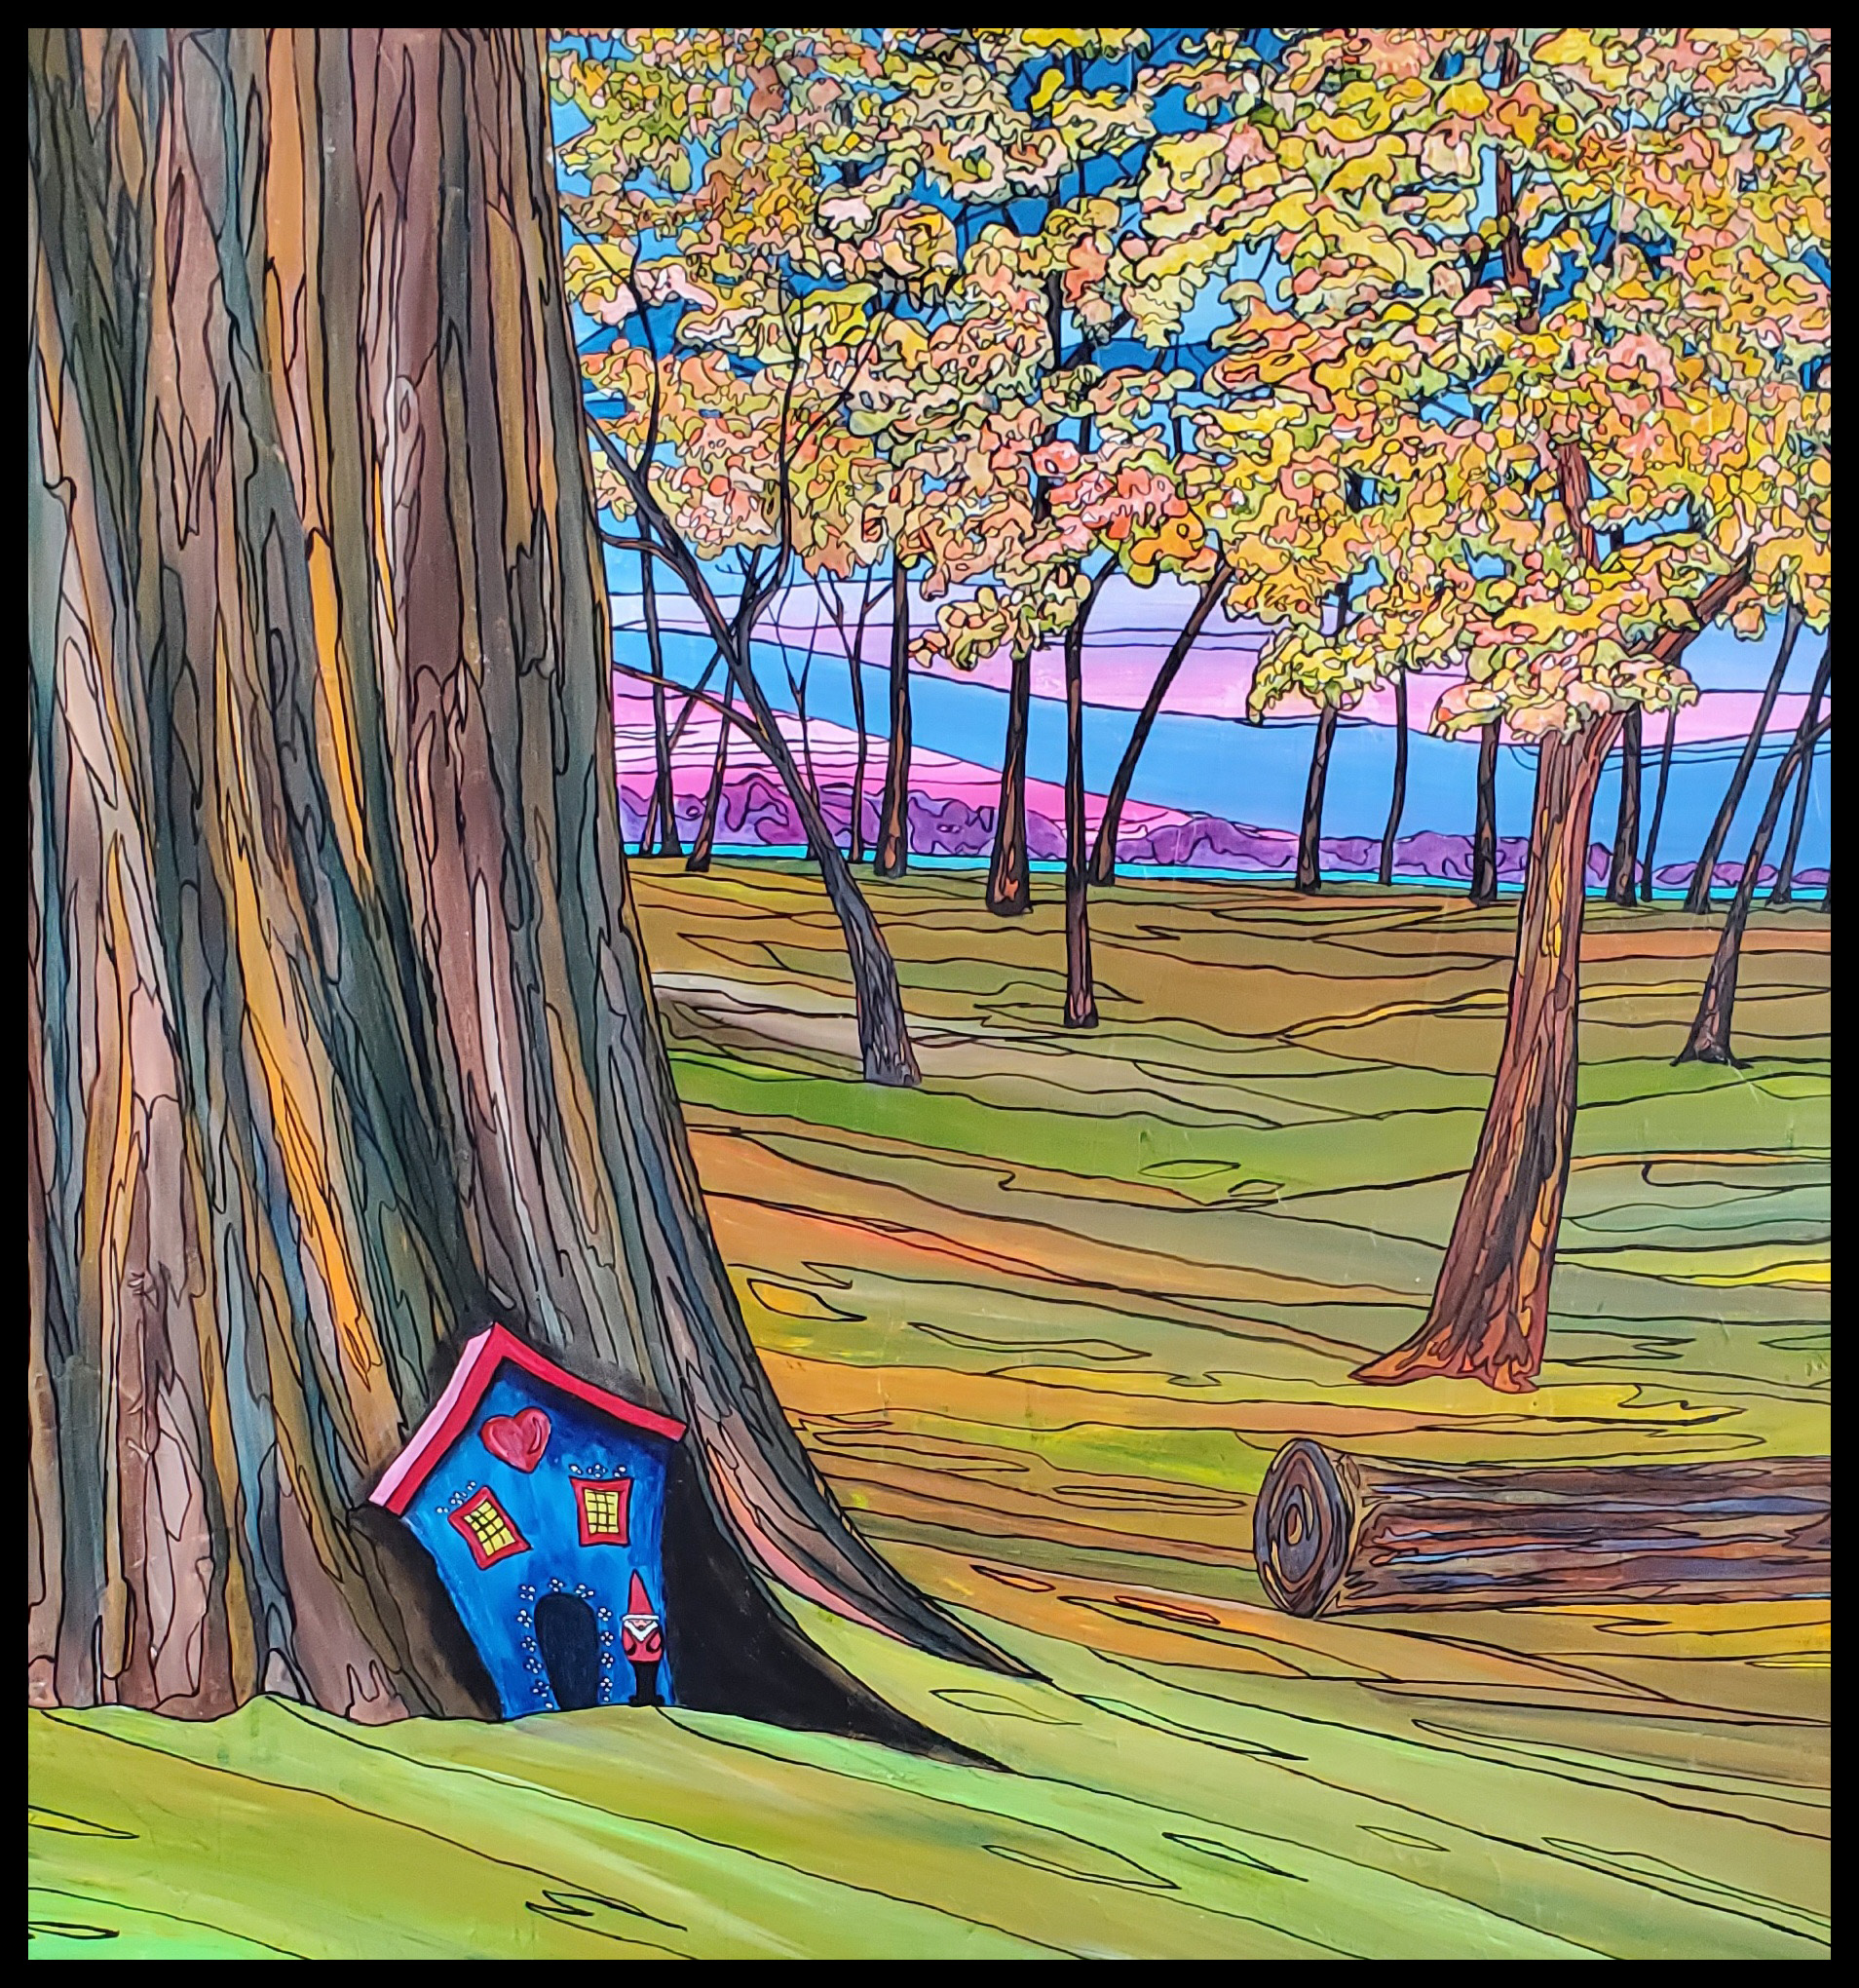 2022-200 "Gnome Home"
Image: 36" x 36"
Framed: 39" x 39"
Acrylic on Canvas
$2500.00